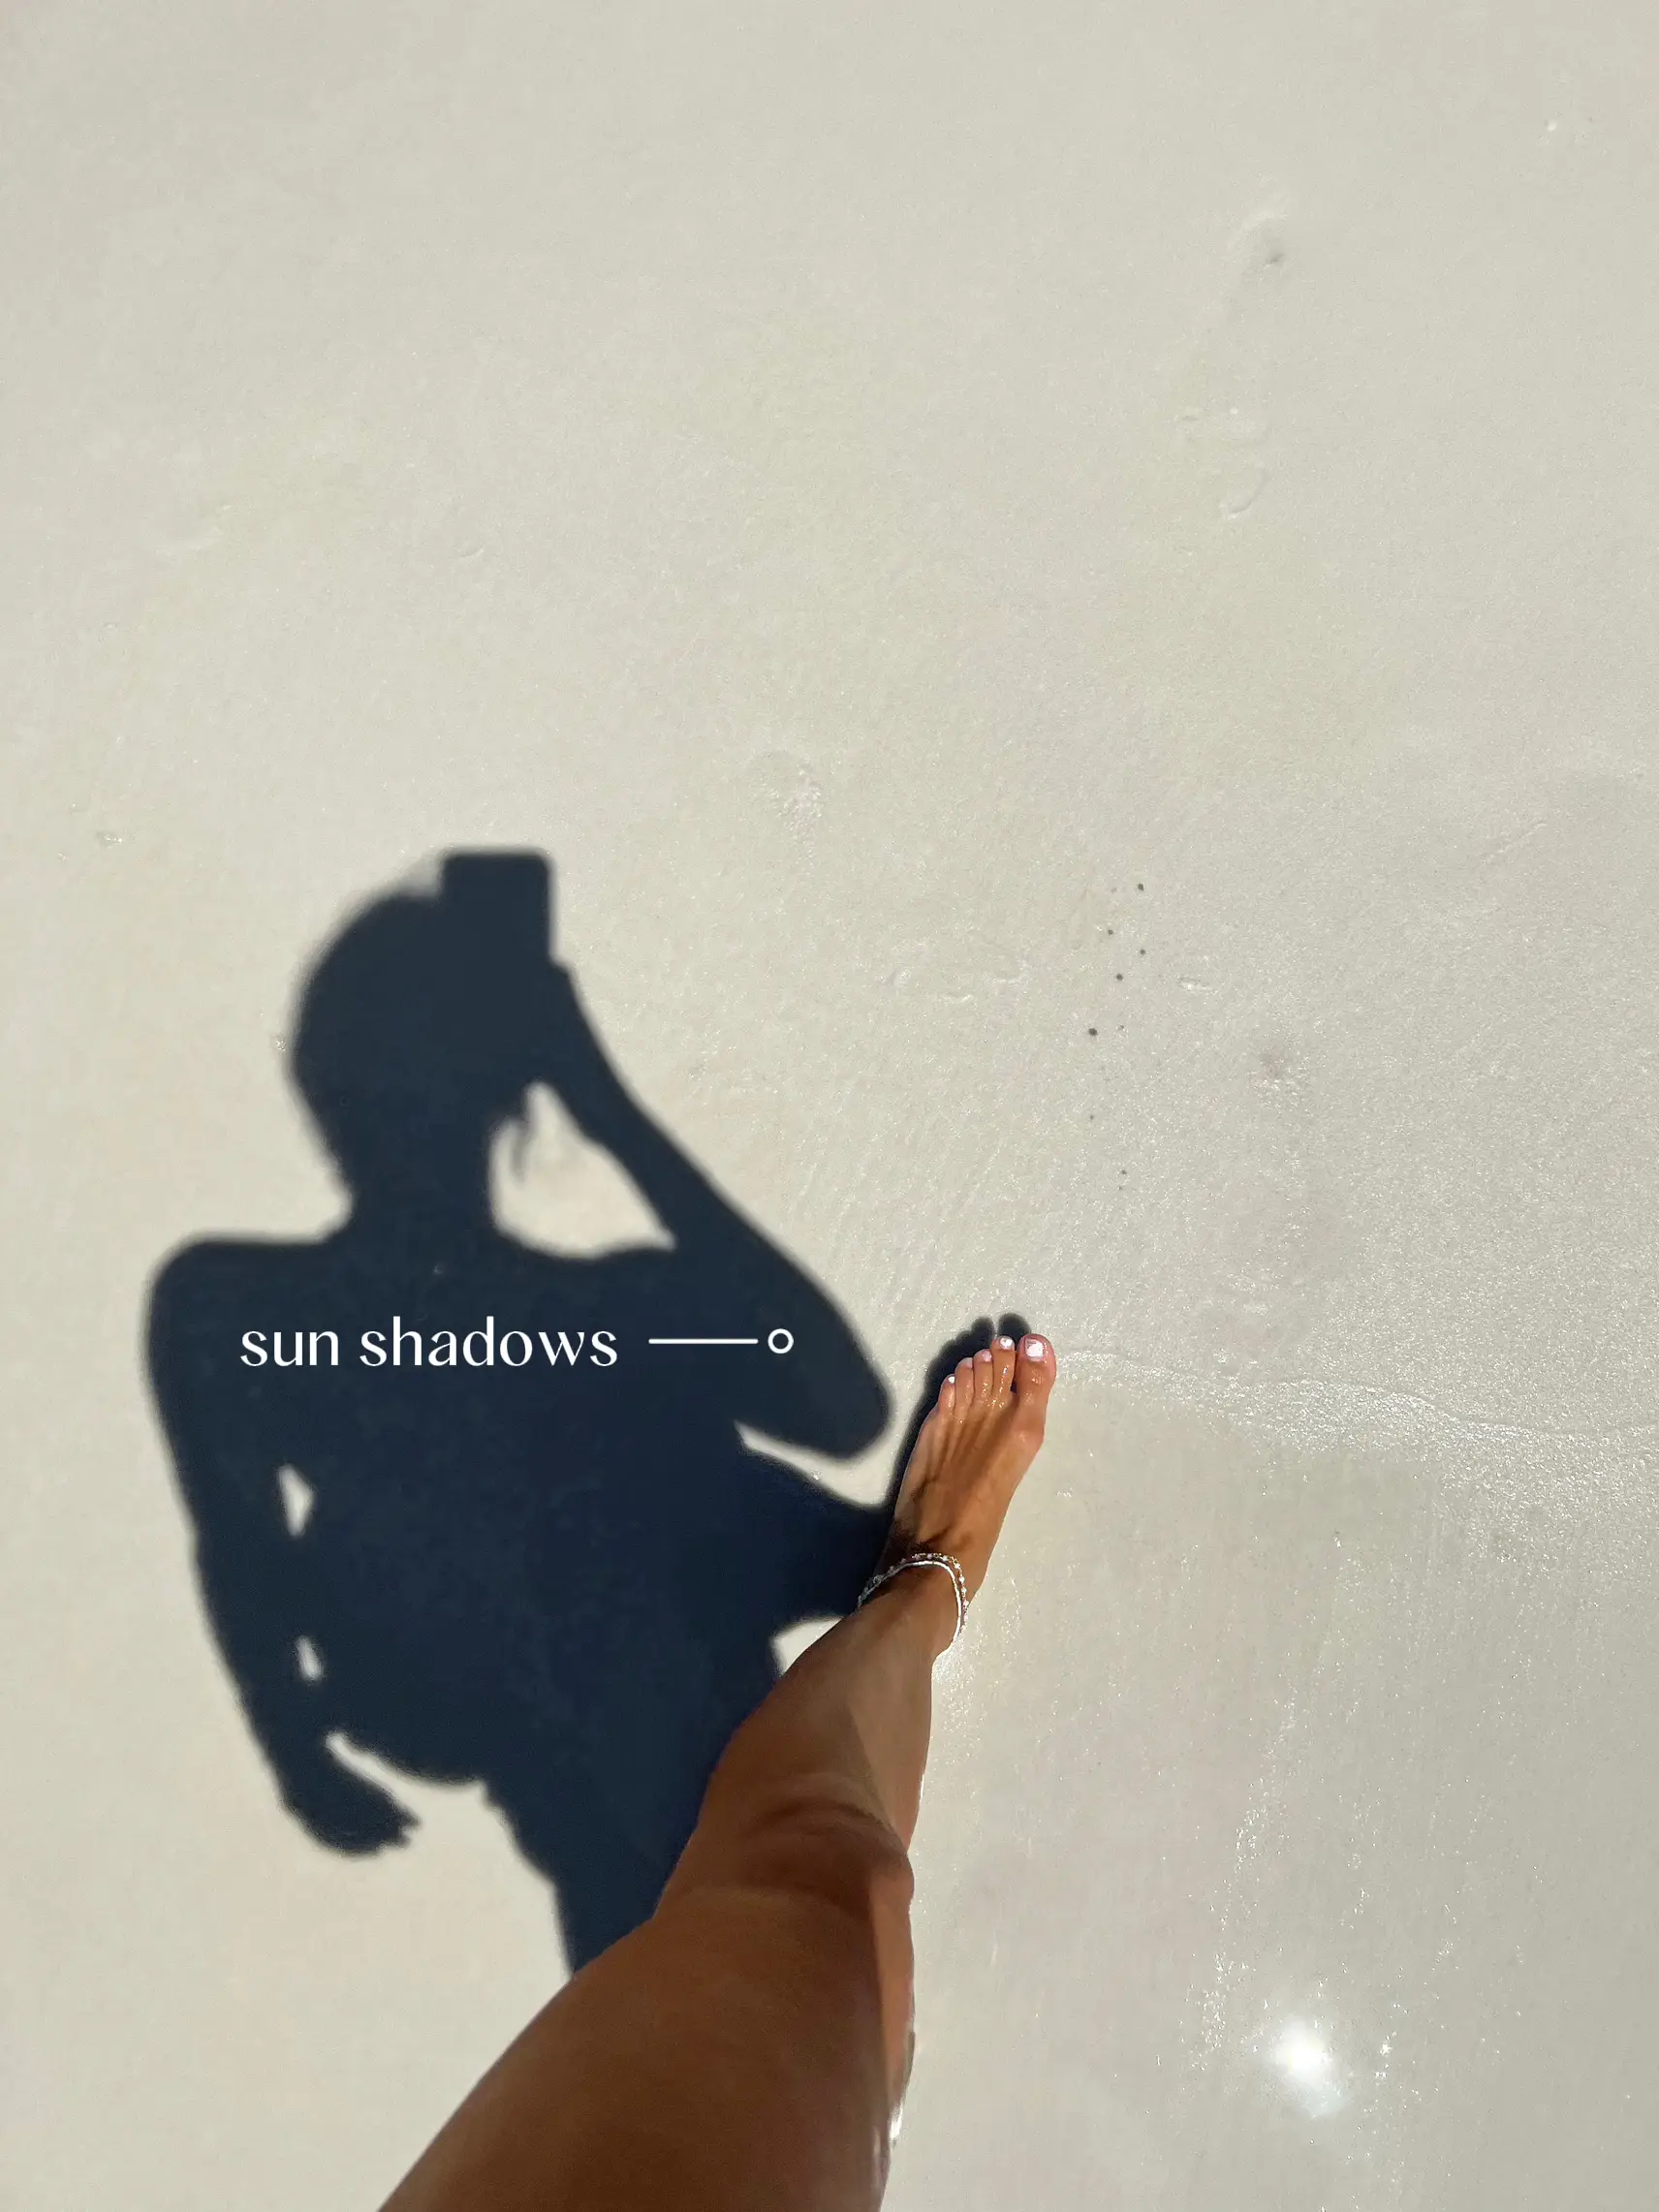  A person's shadow is cast on the sand.